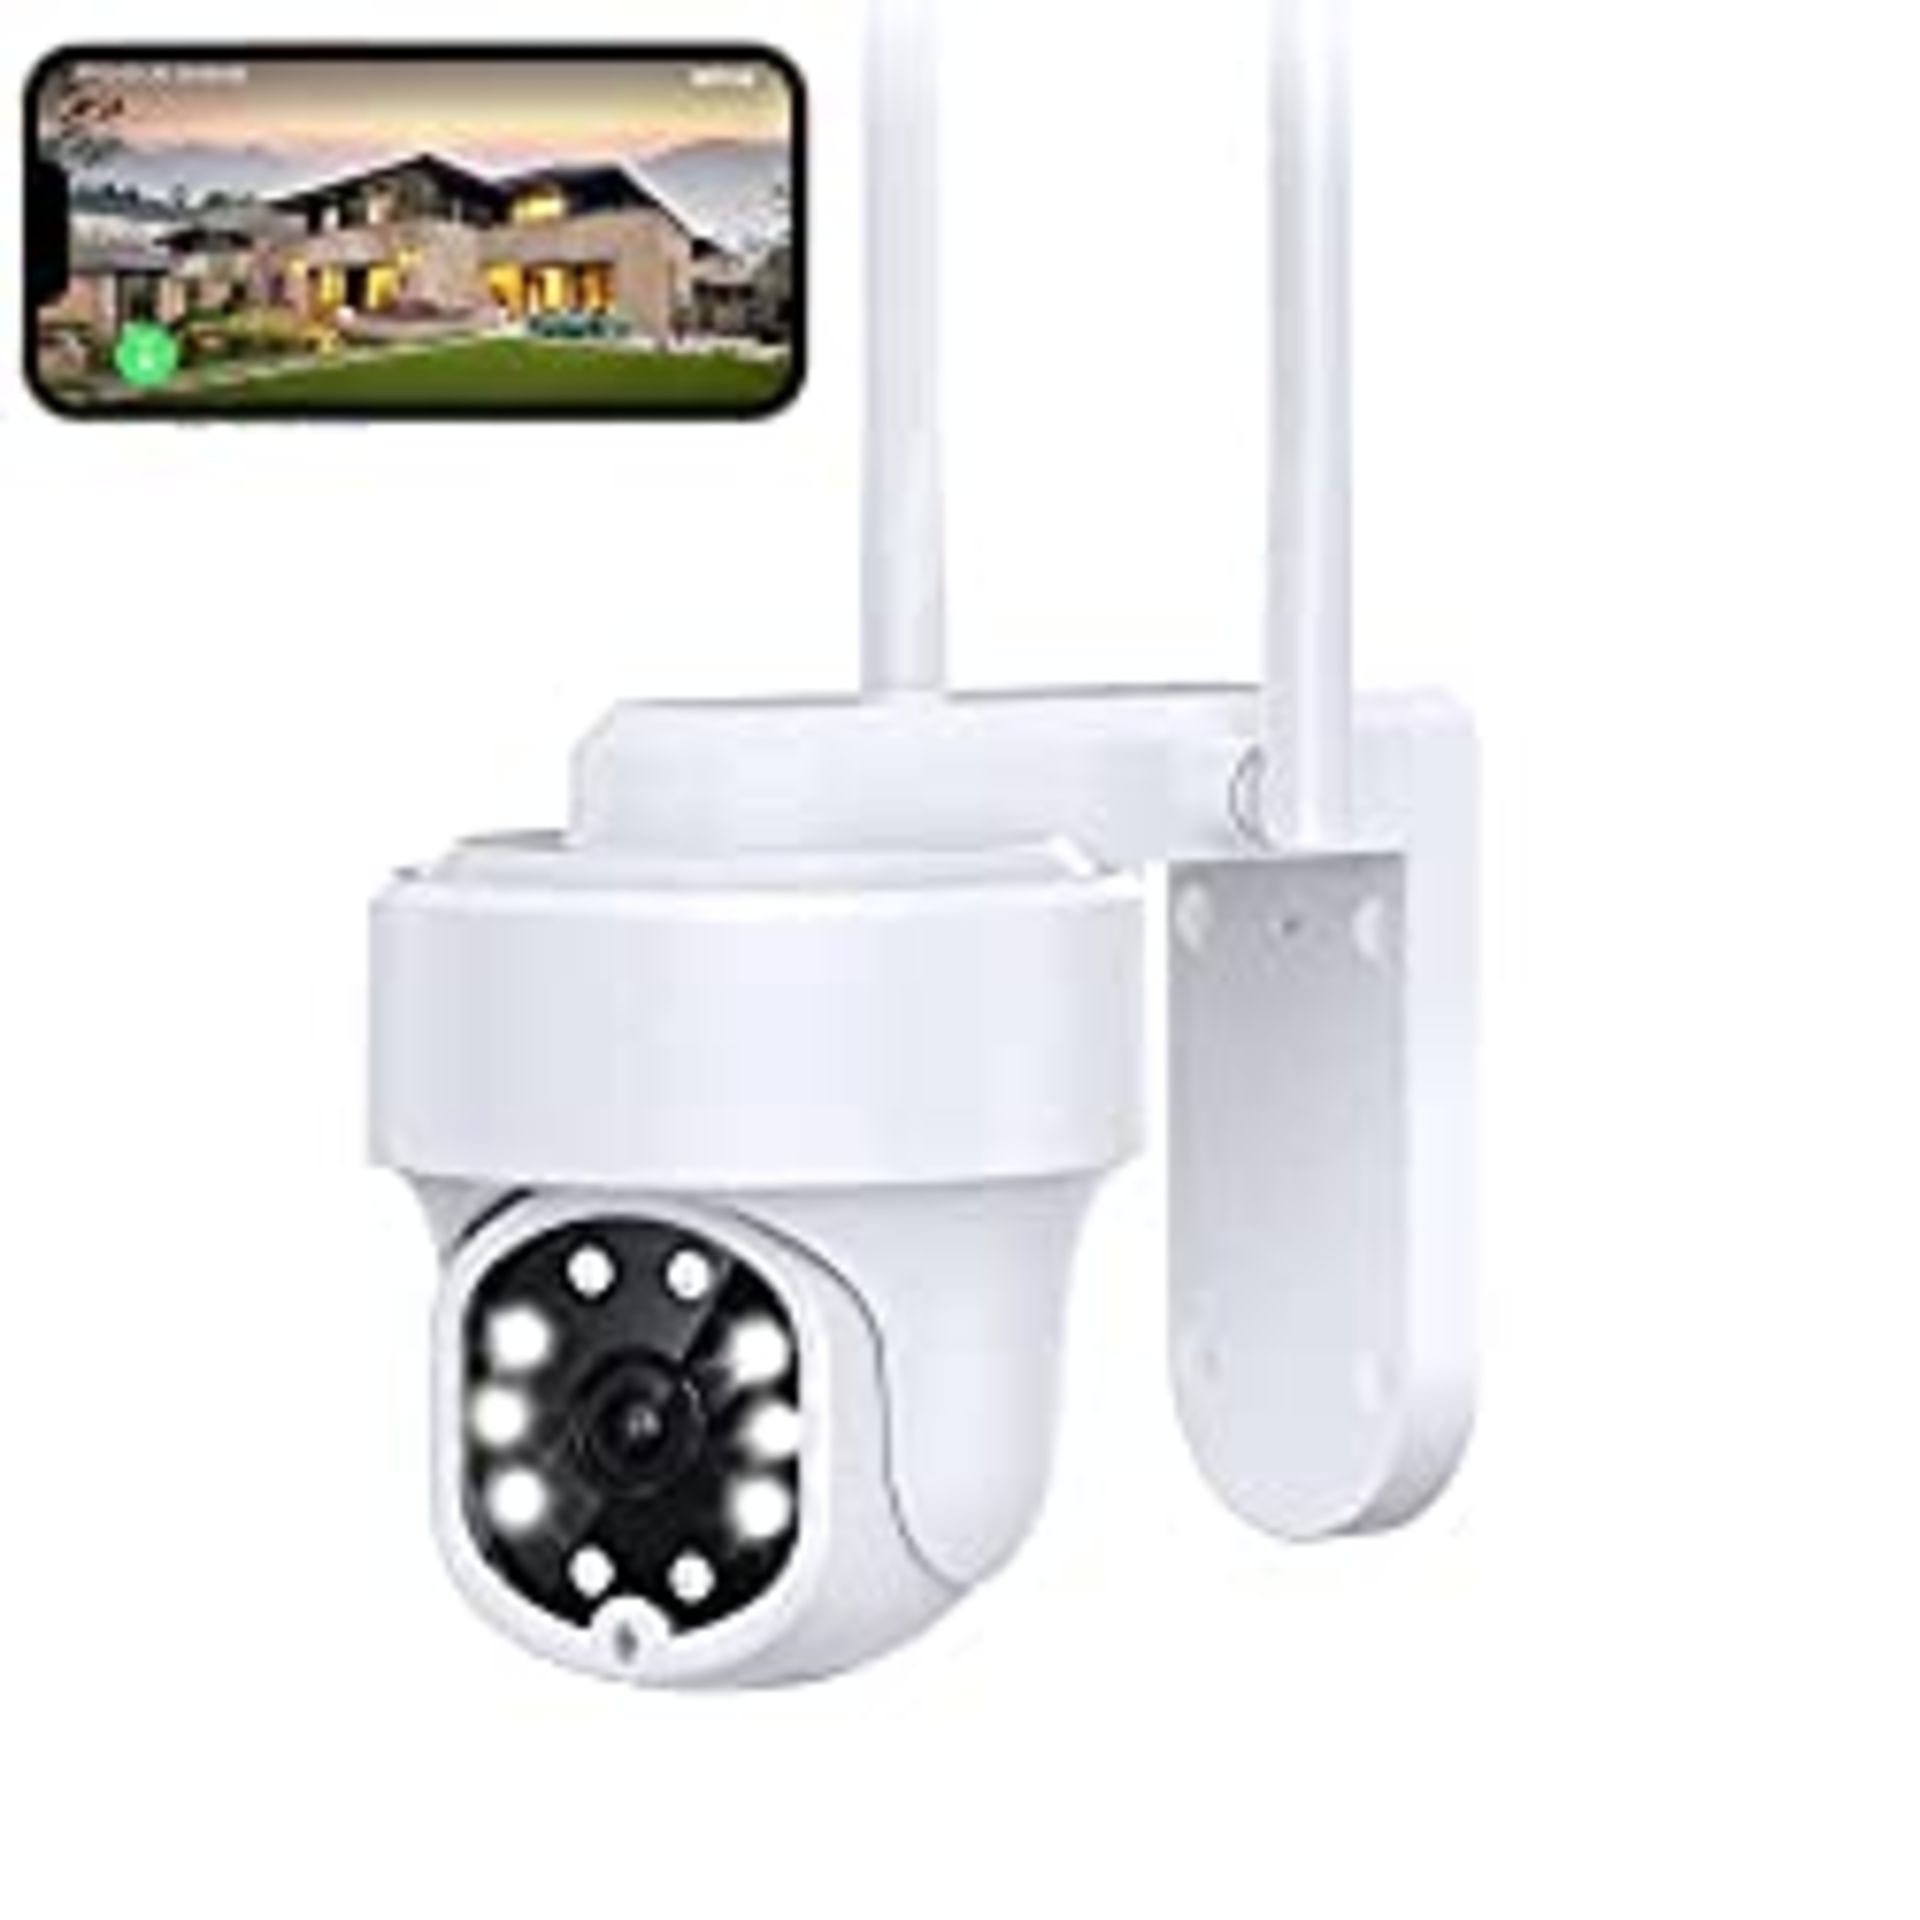 RRP £49.99 Netvue Outdoor Security Camera